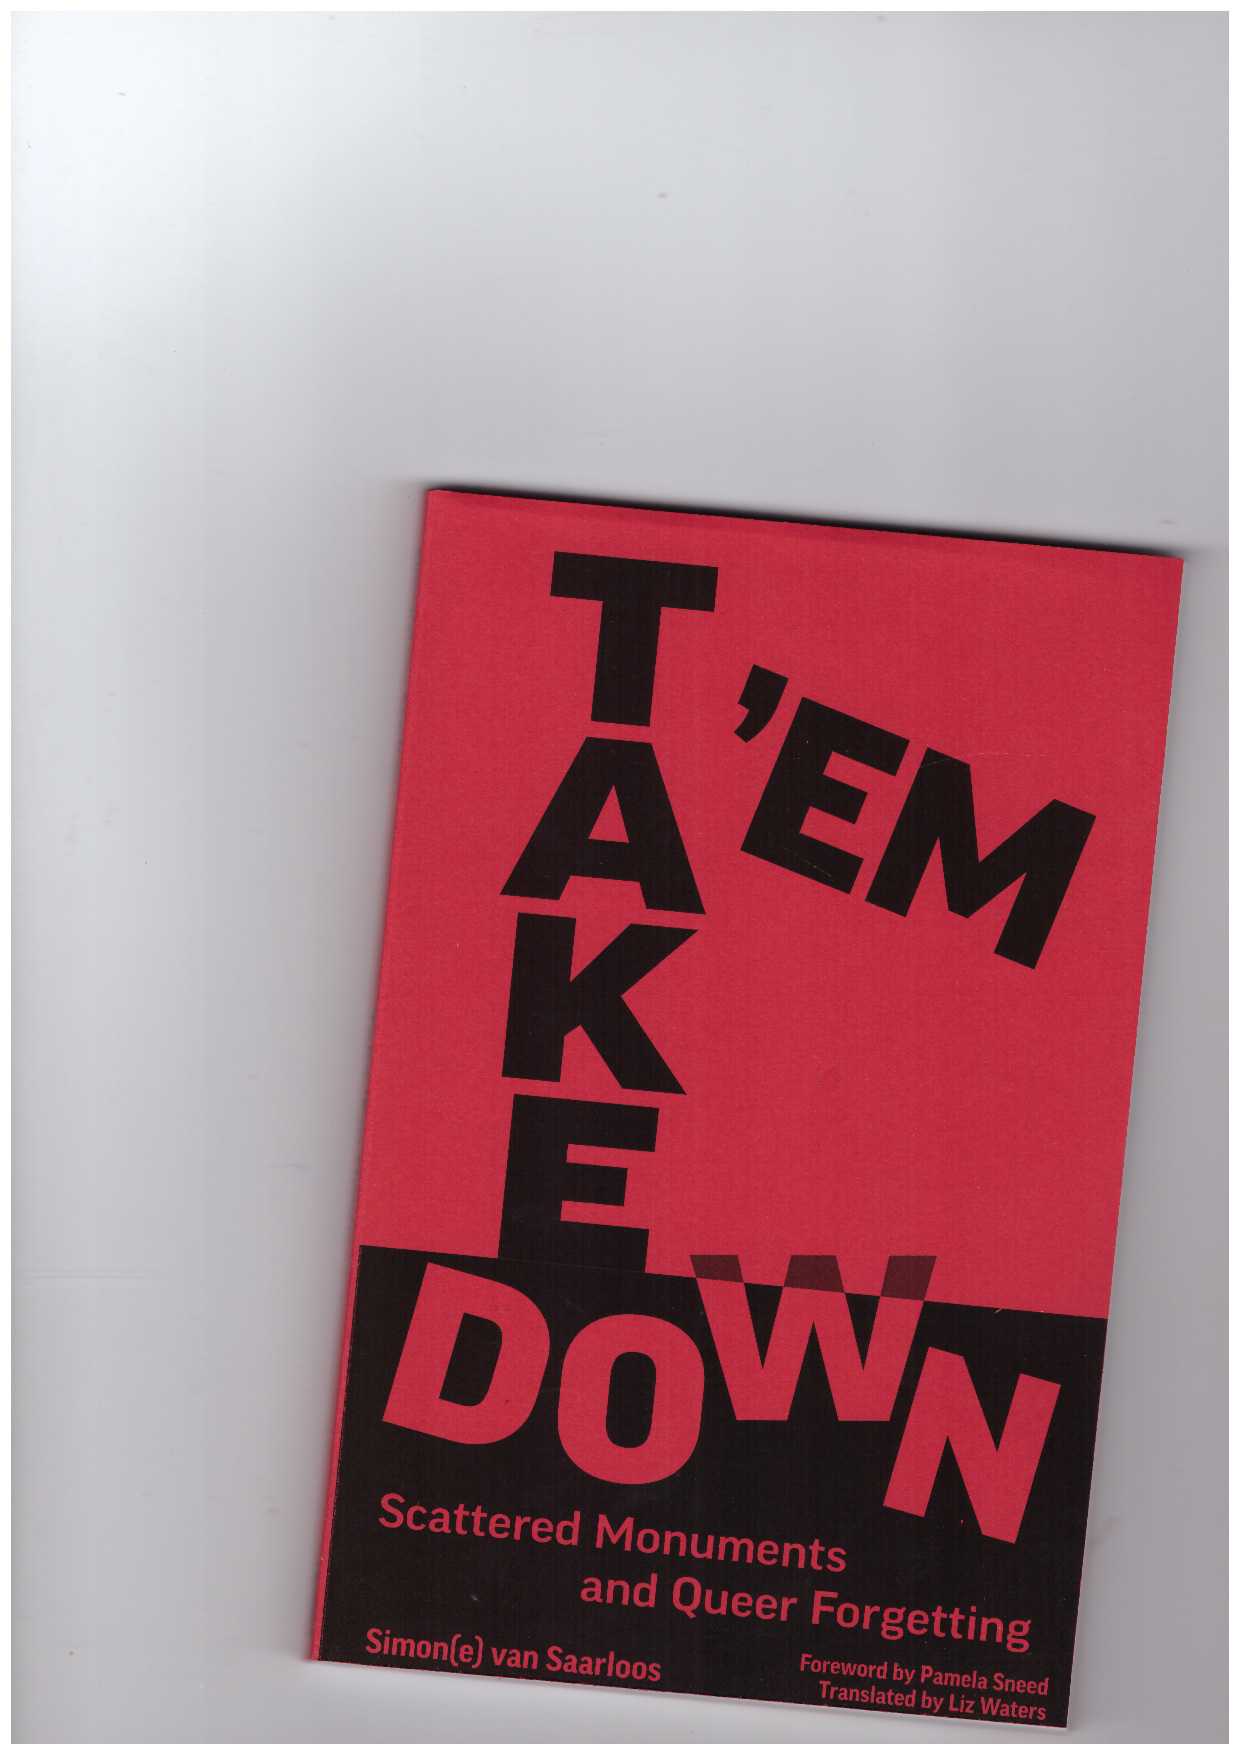 VAN SAARLOOS, Simon(e) - Take 'Em Down: Scattered Monuments and Queer Forgetting